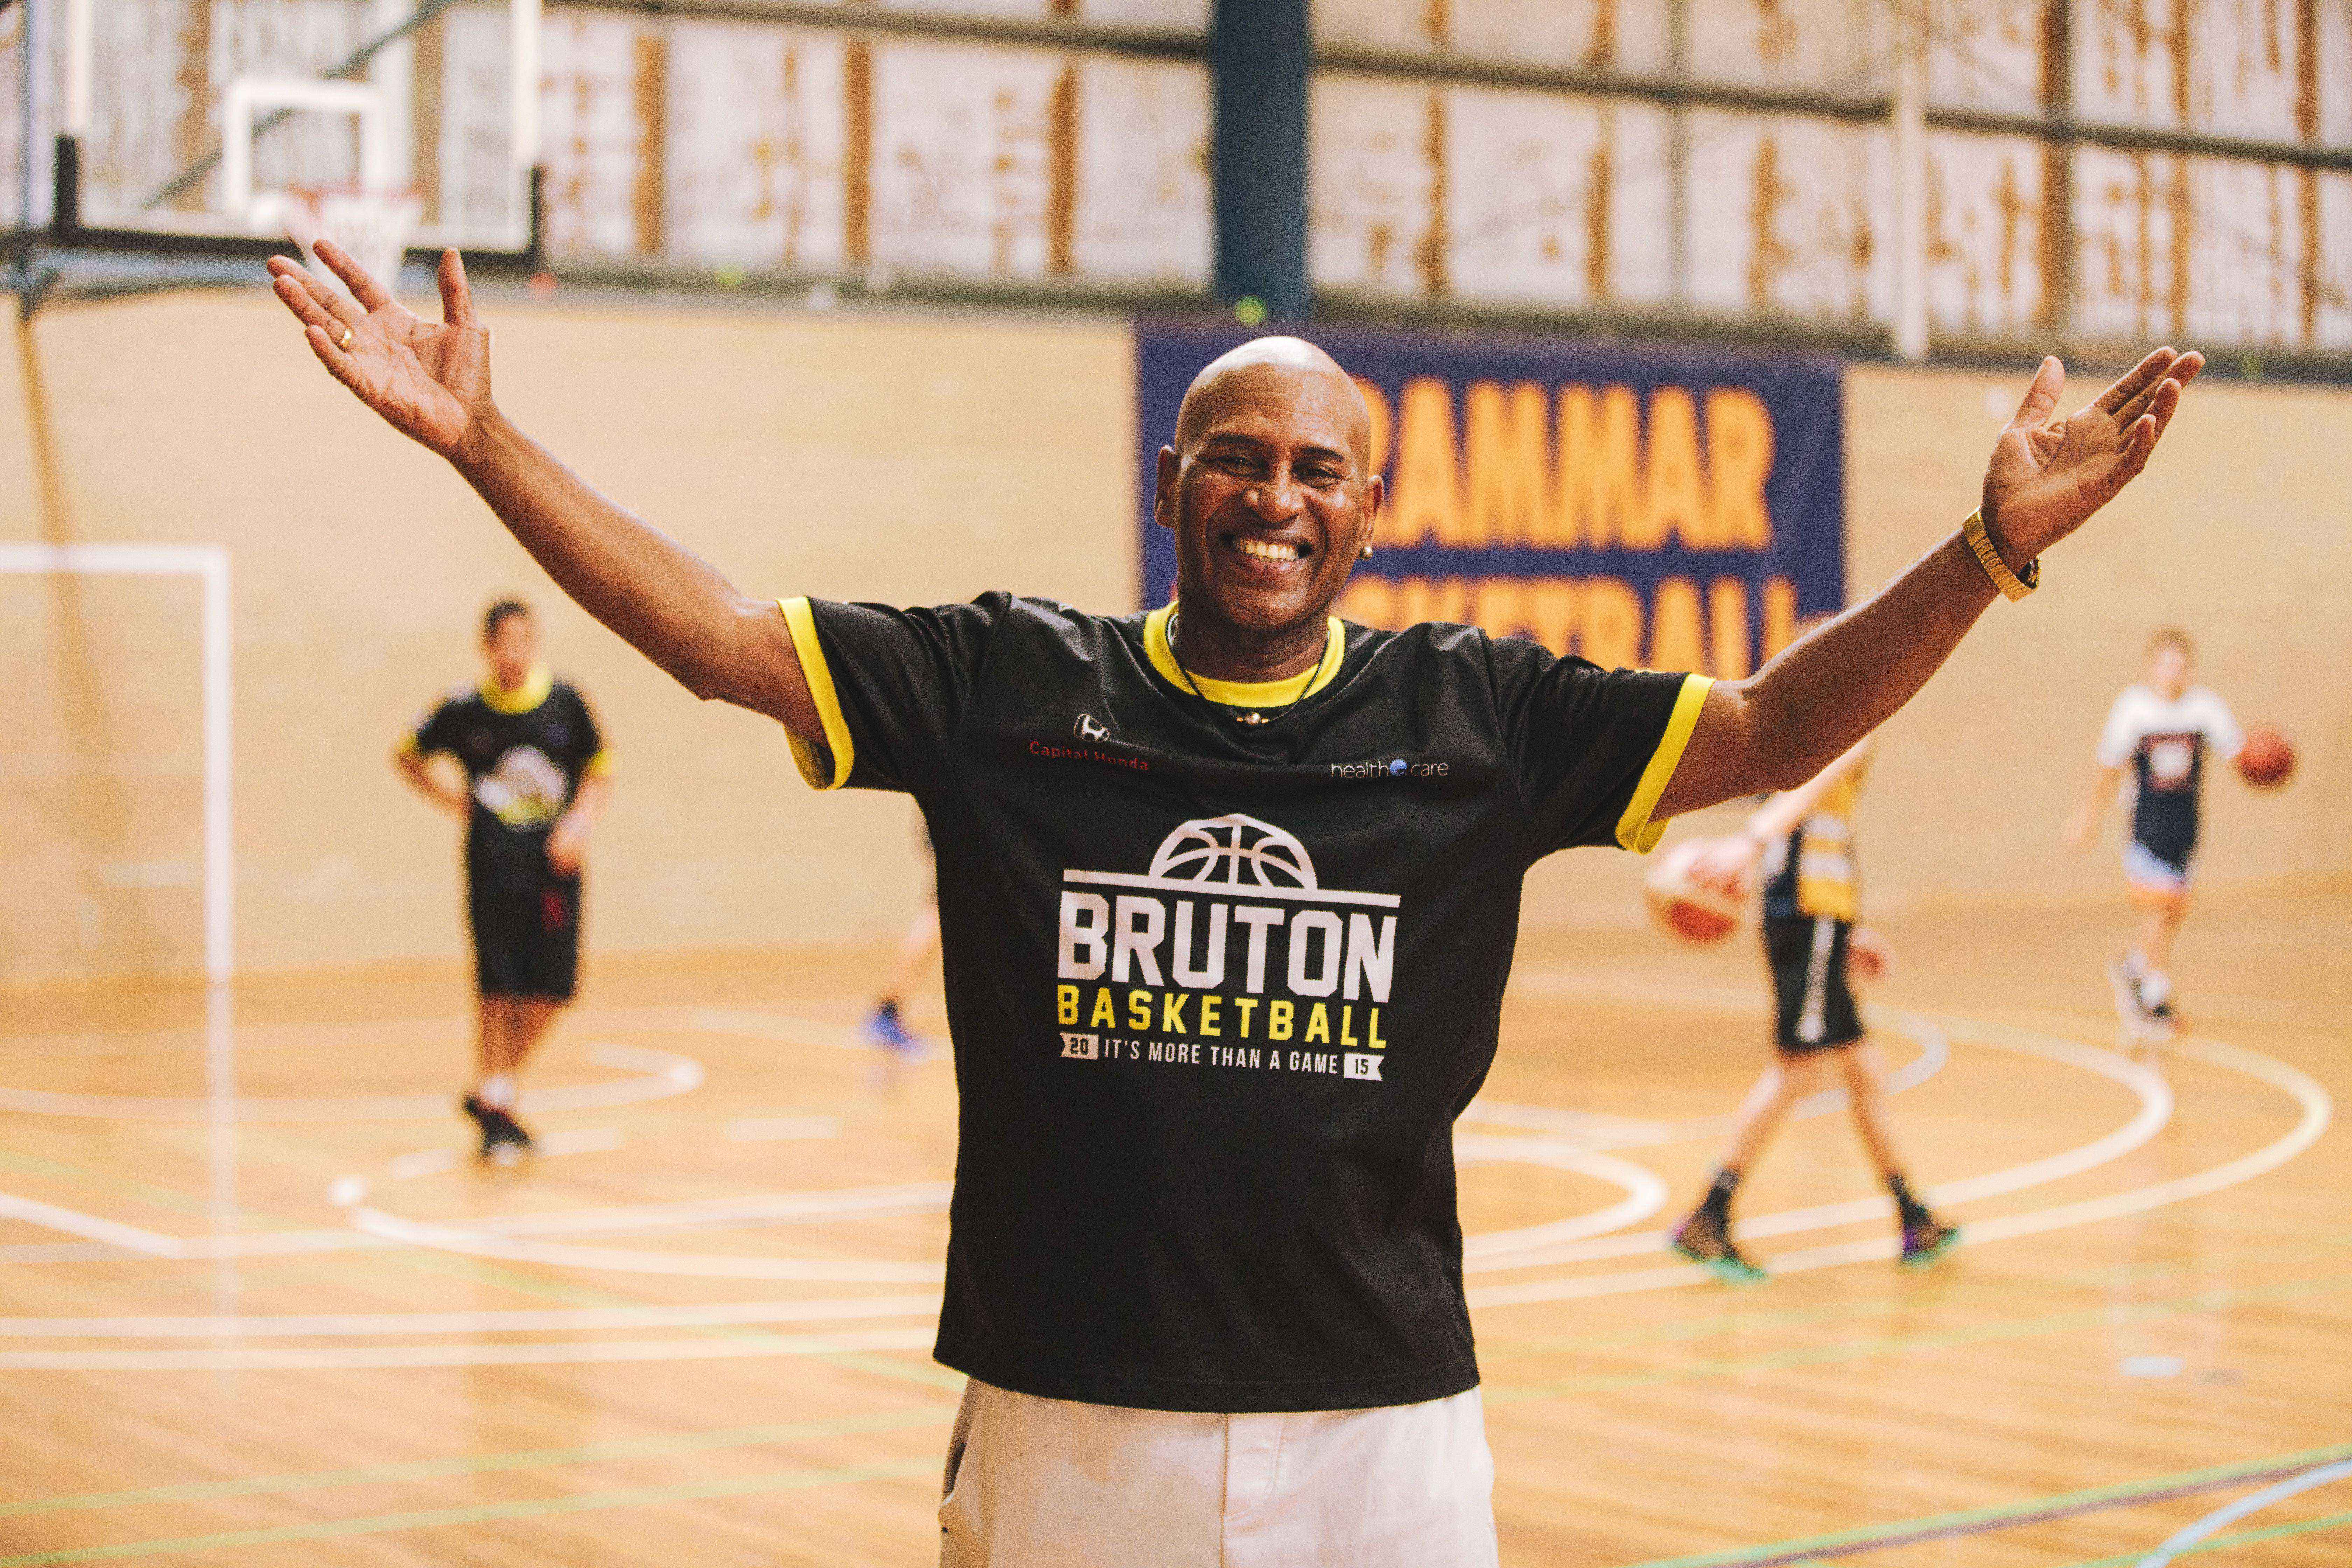 Cal Bruton - Living proof that basketball changes lives